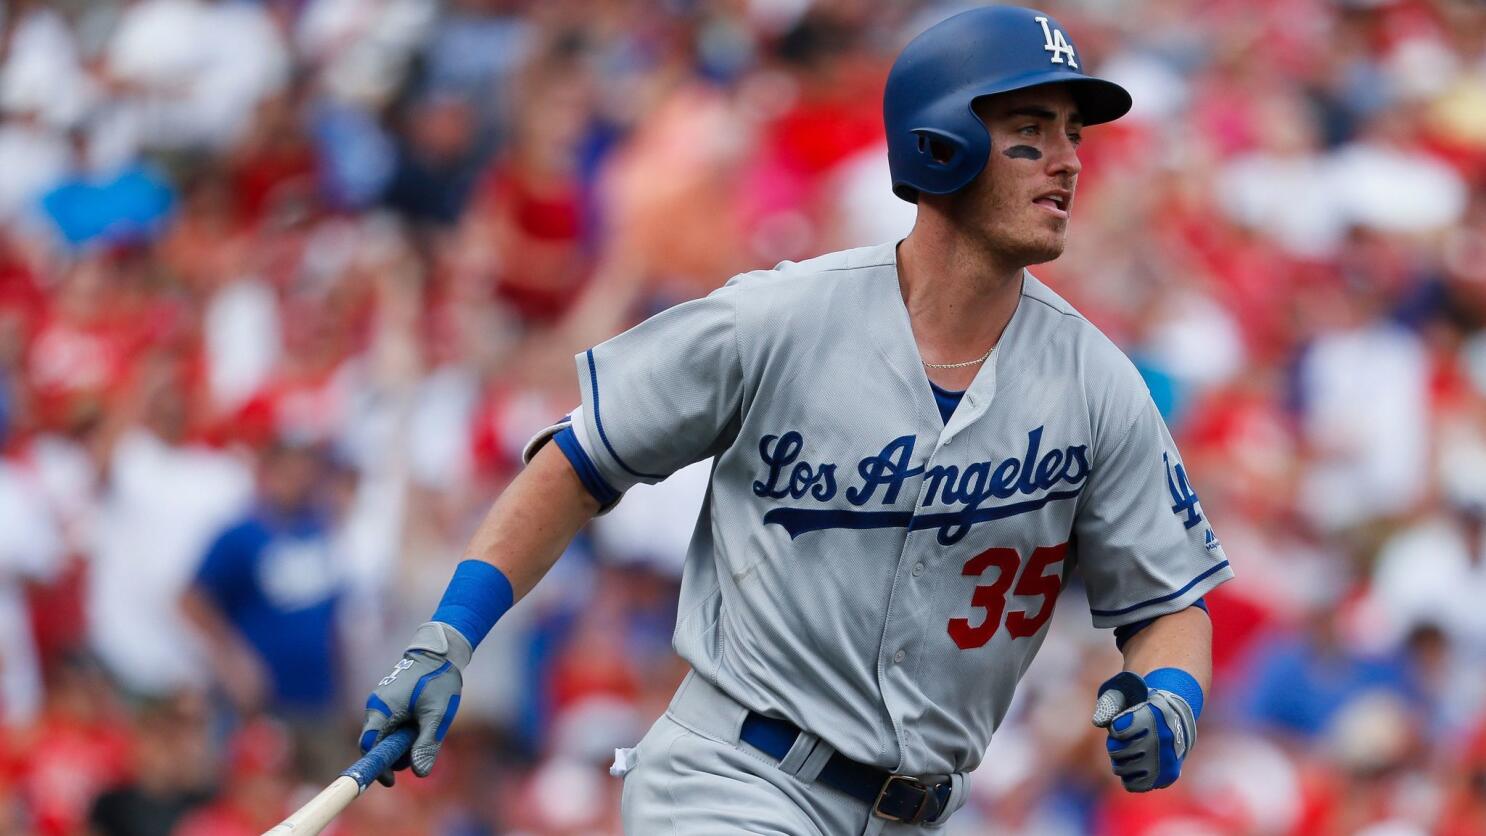 Logan White saw big things in Cody Bellinger's future. He didn't